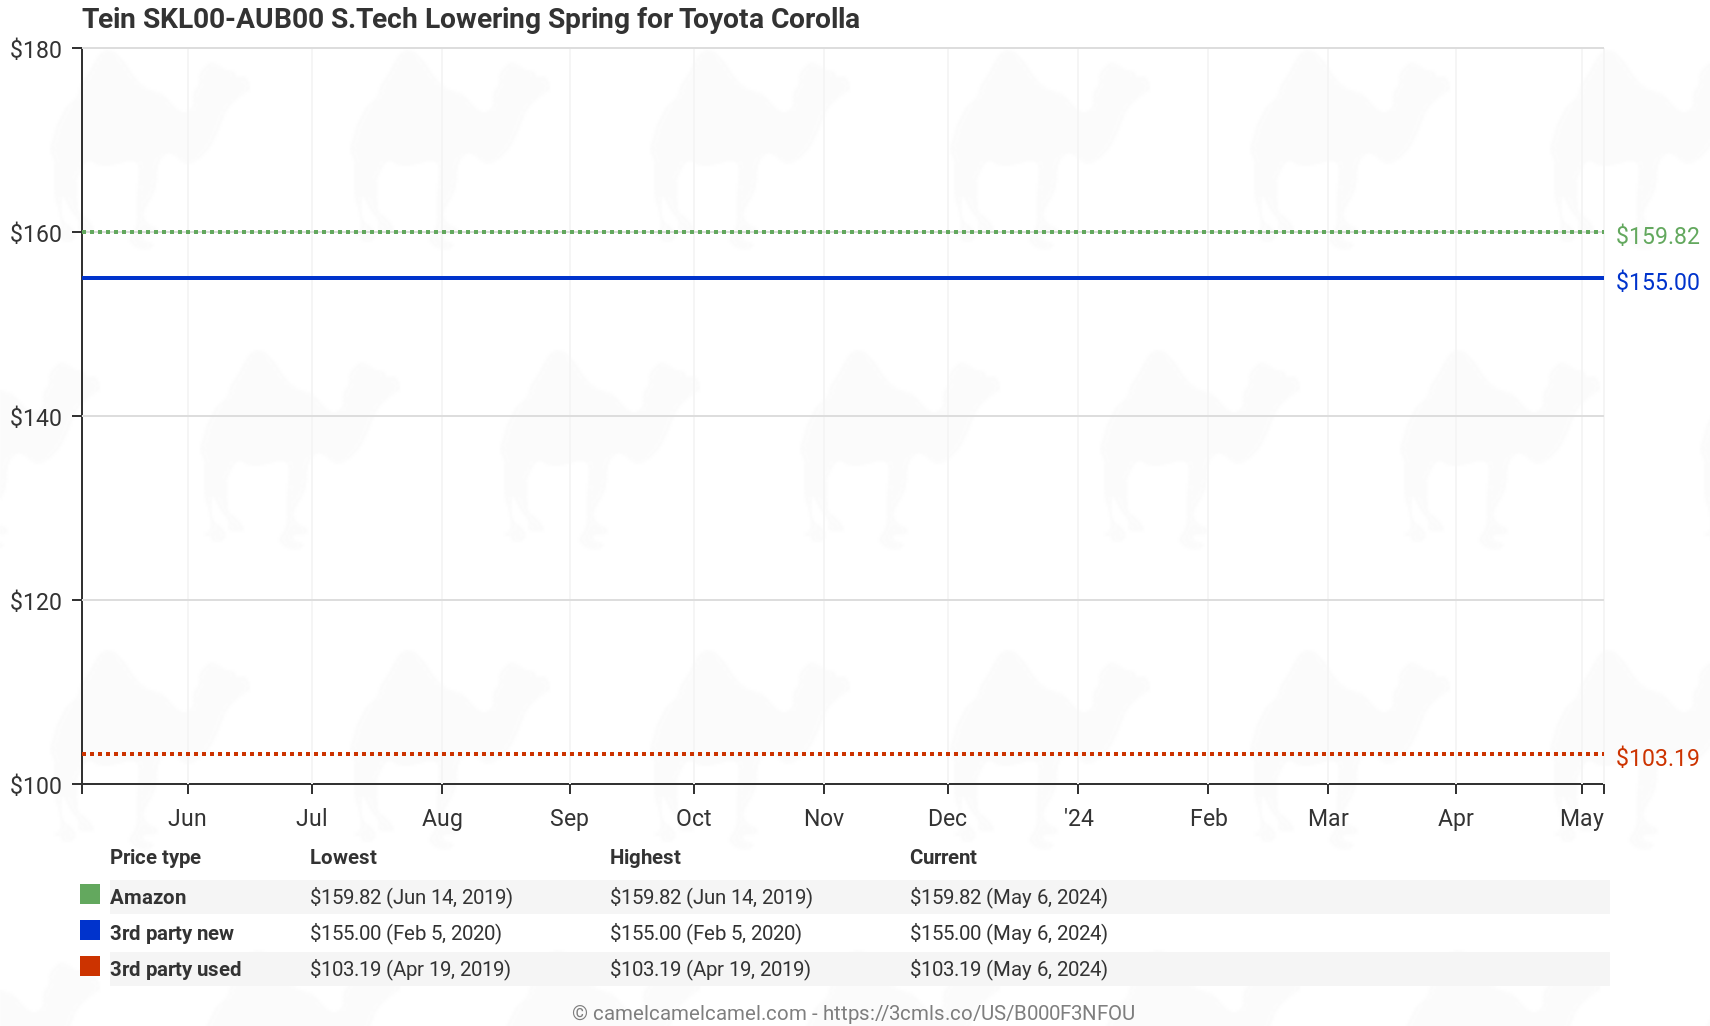 Tein SKL00-AUB00 S.Tech Lowering Spring for Toyota Corolla - Price History: B000F3NFOU